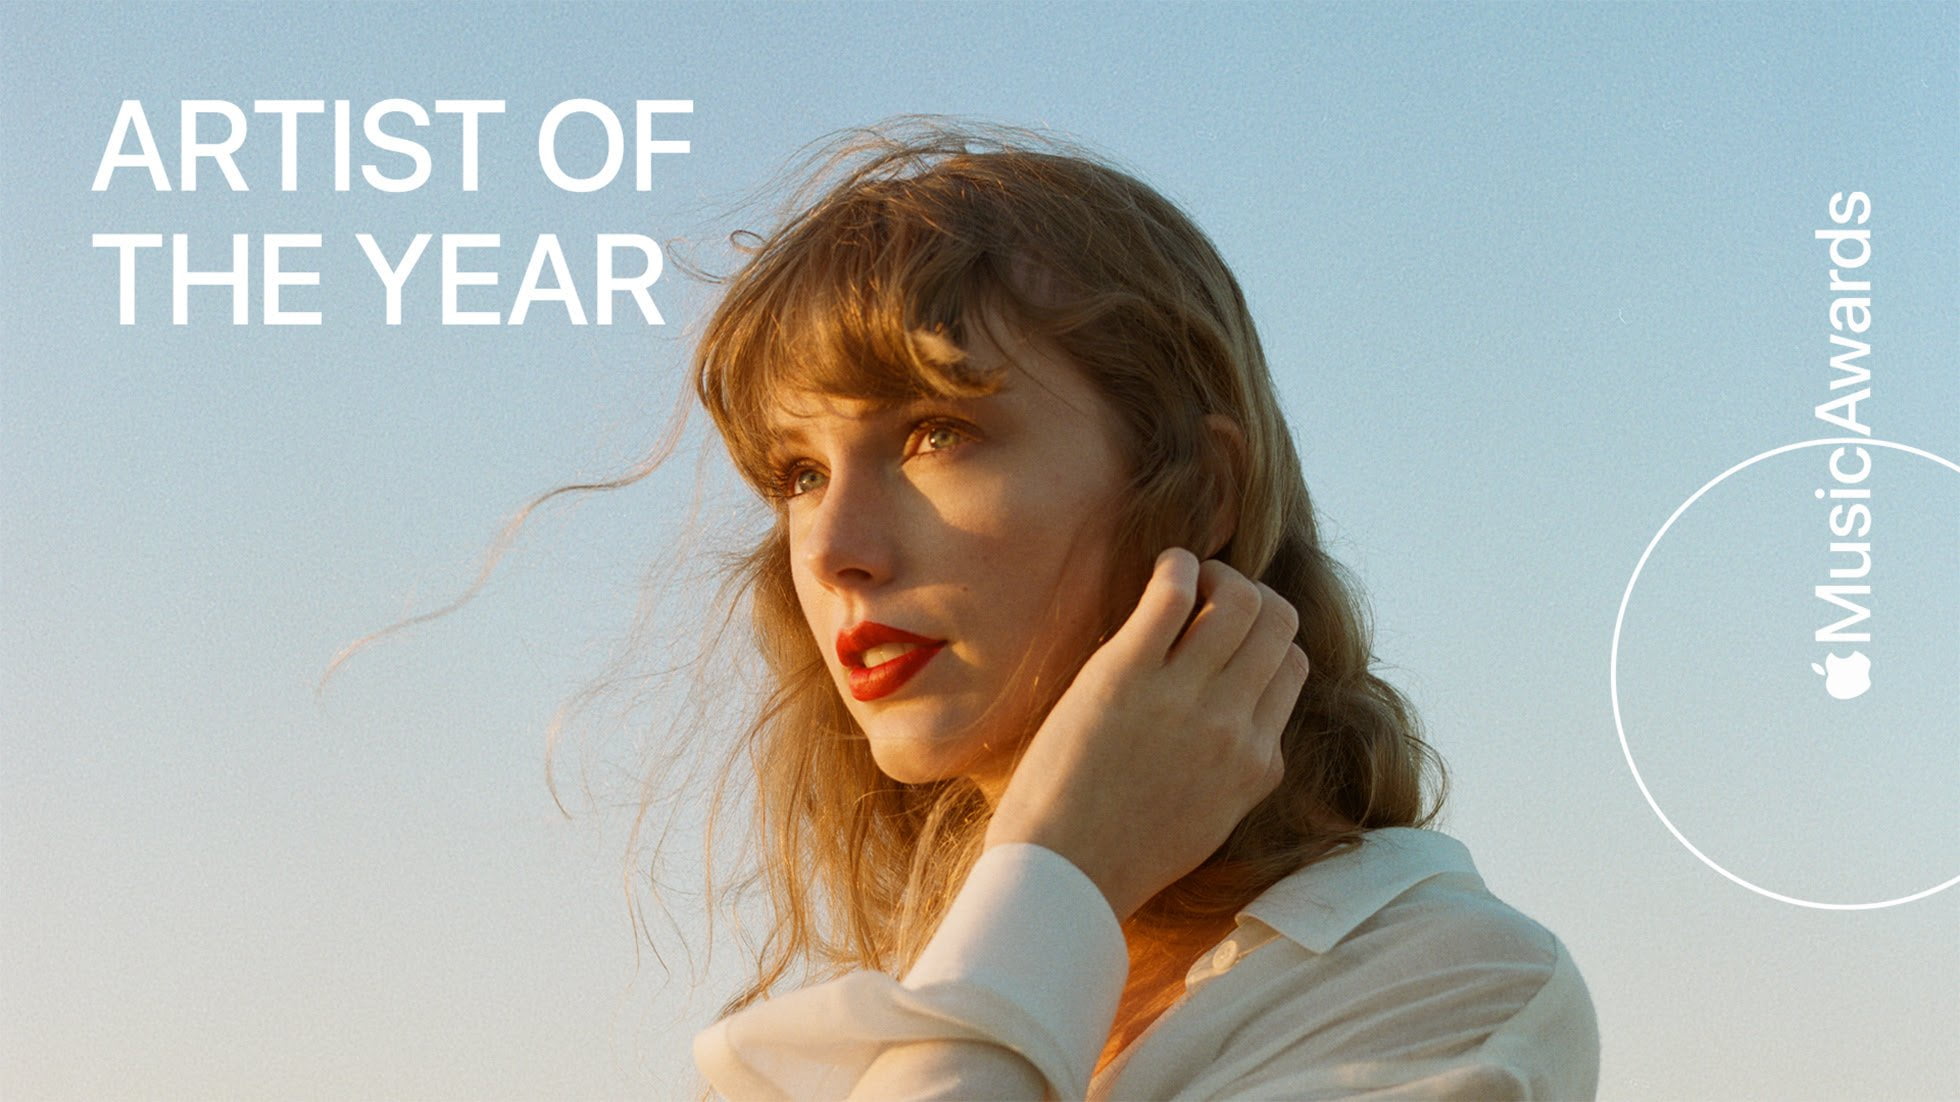 Taylor Swift is Apple Music’s Artist of the Year for 2023